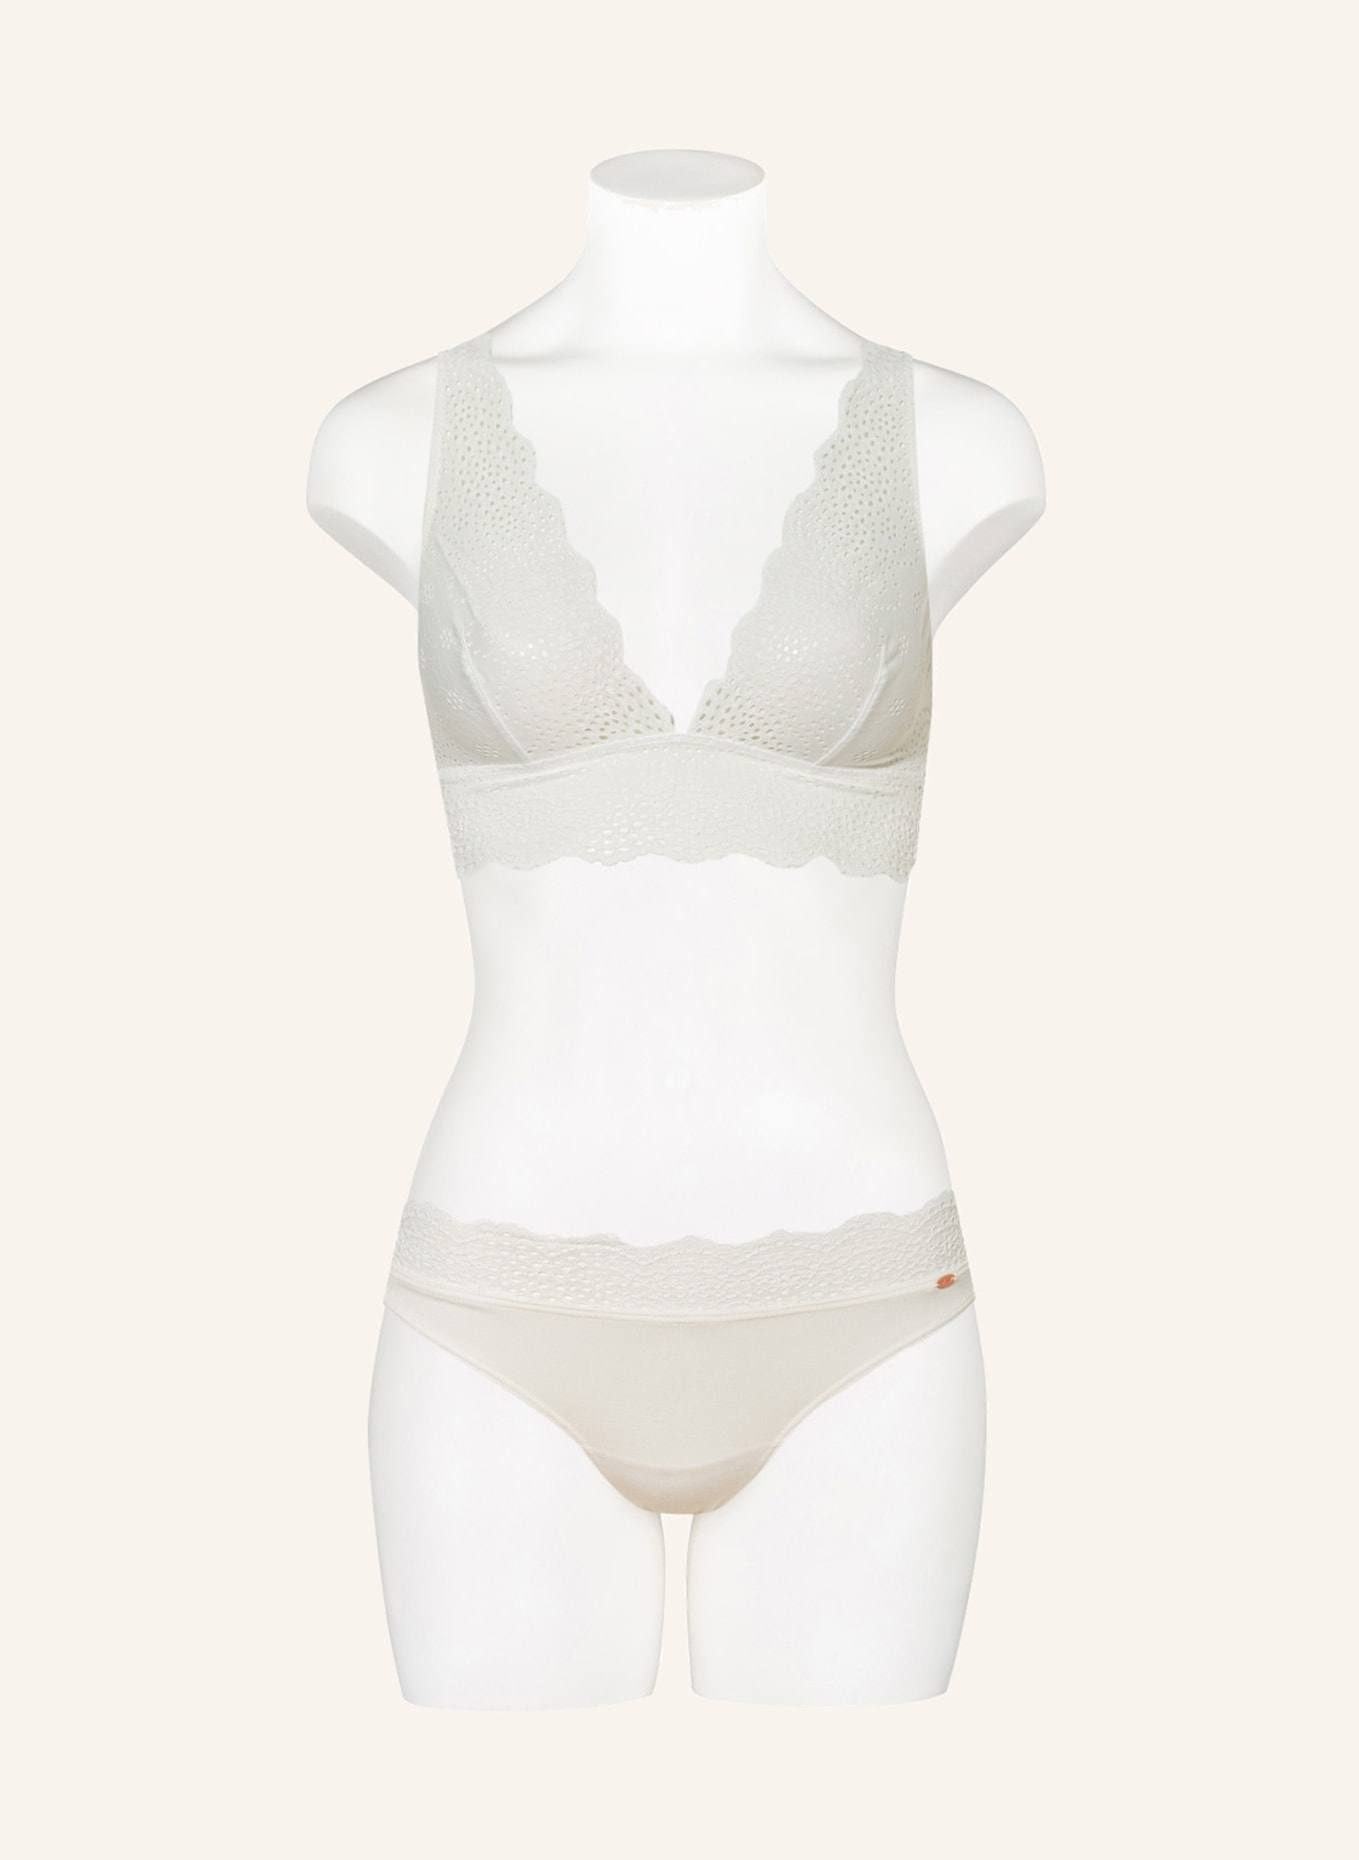 Skiny Bustier EVERY DAY IN BAMBOO LACE, Farbe: WEISS (Bild 2)